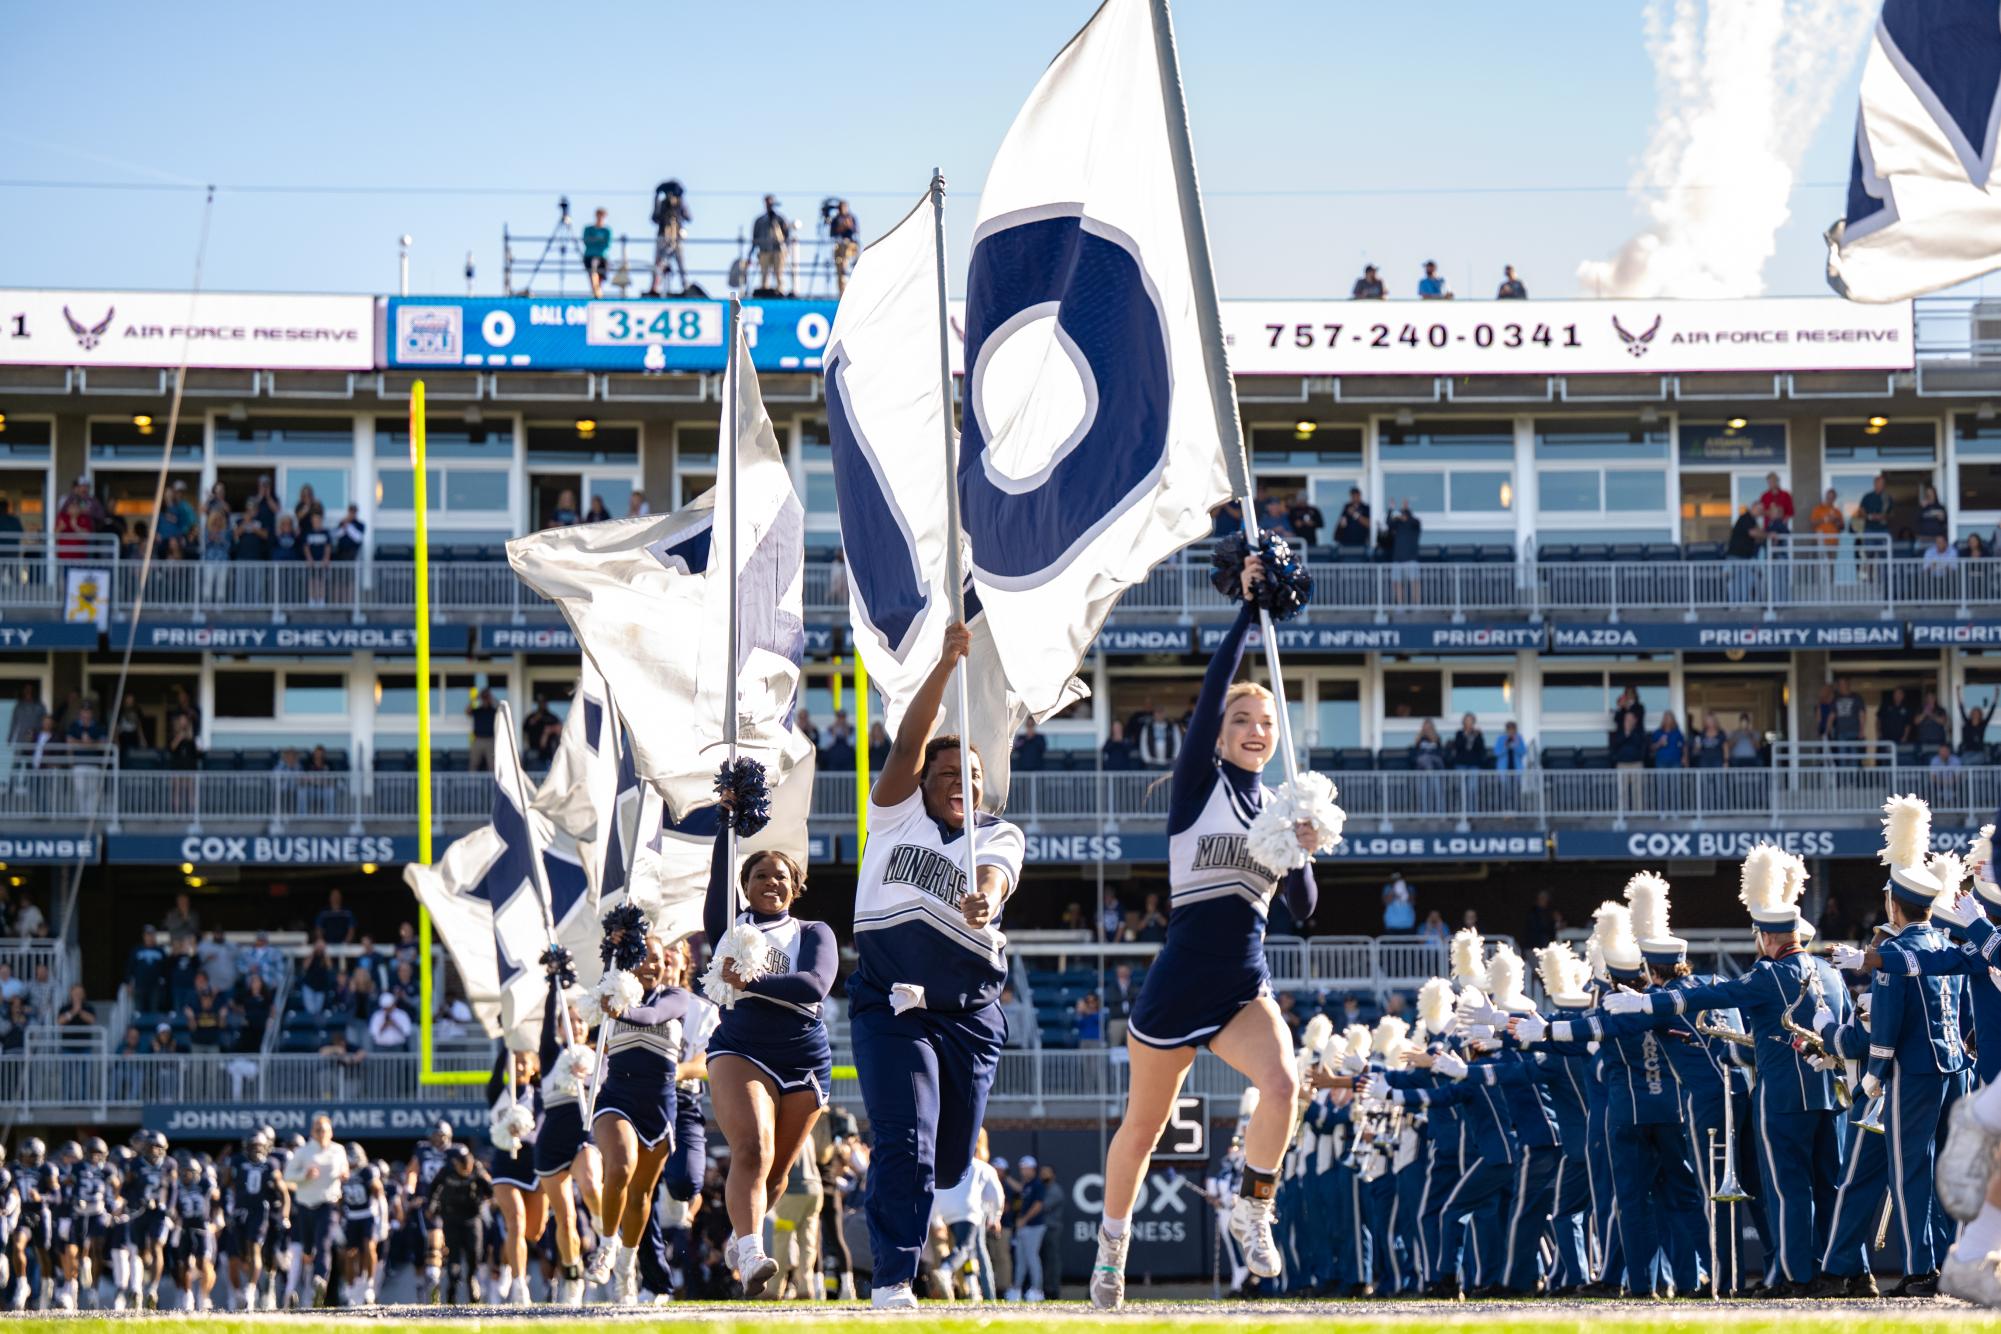 ODU Cheerleaders lead the charge as the Monarchs make their entrance.